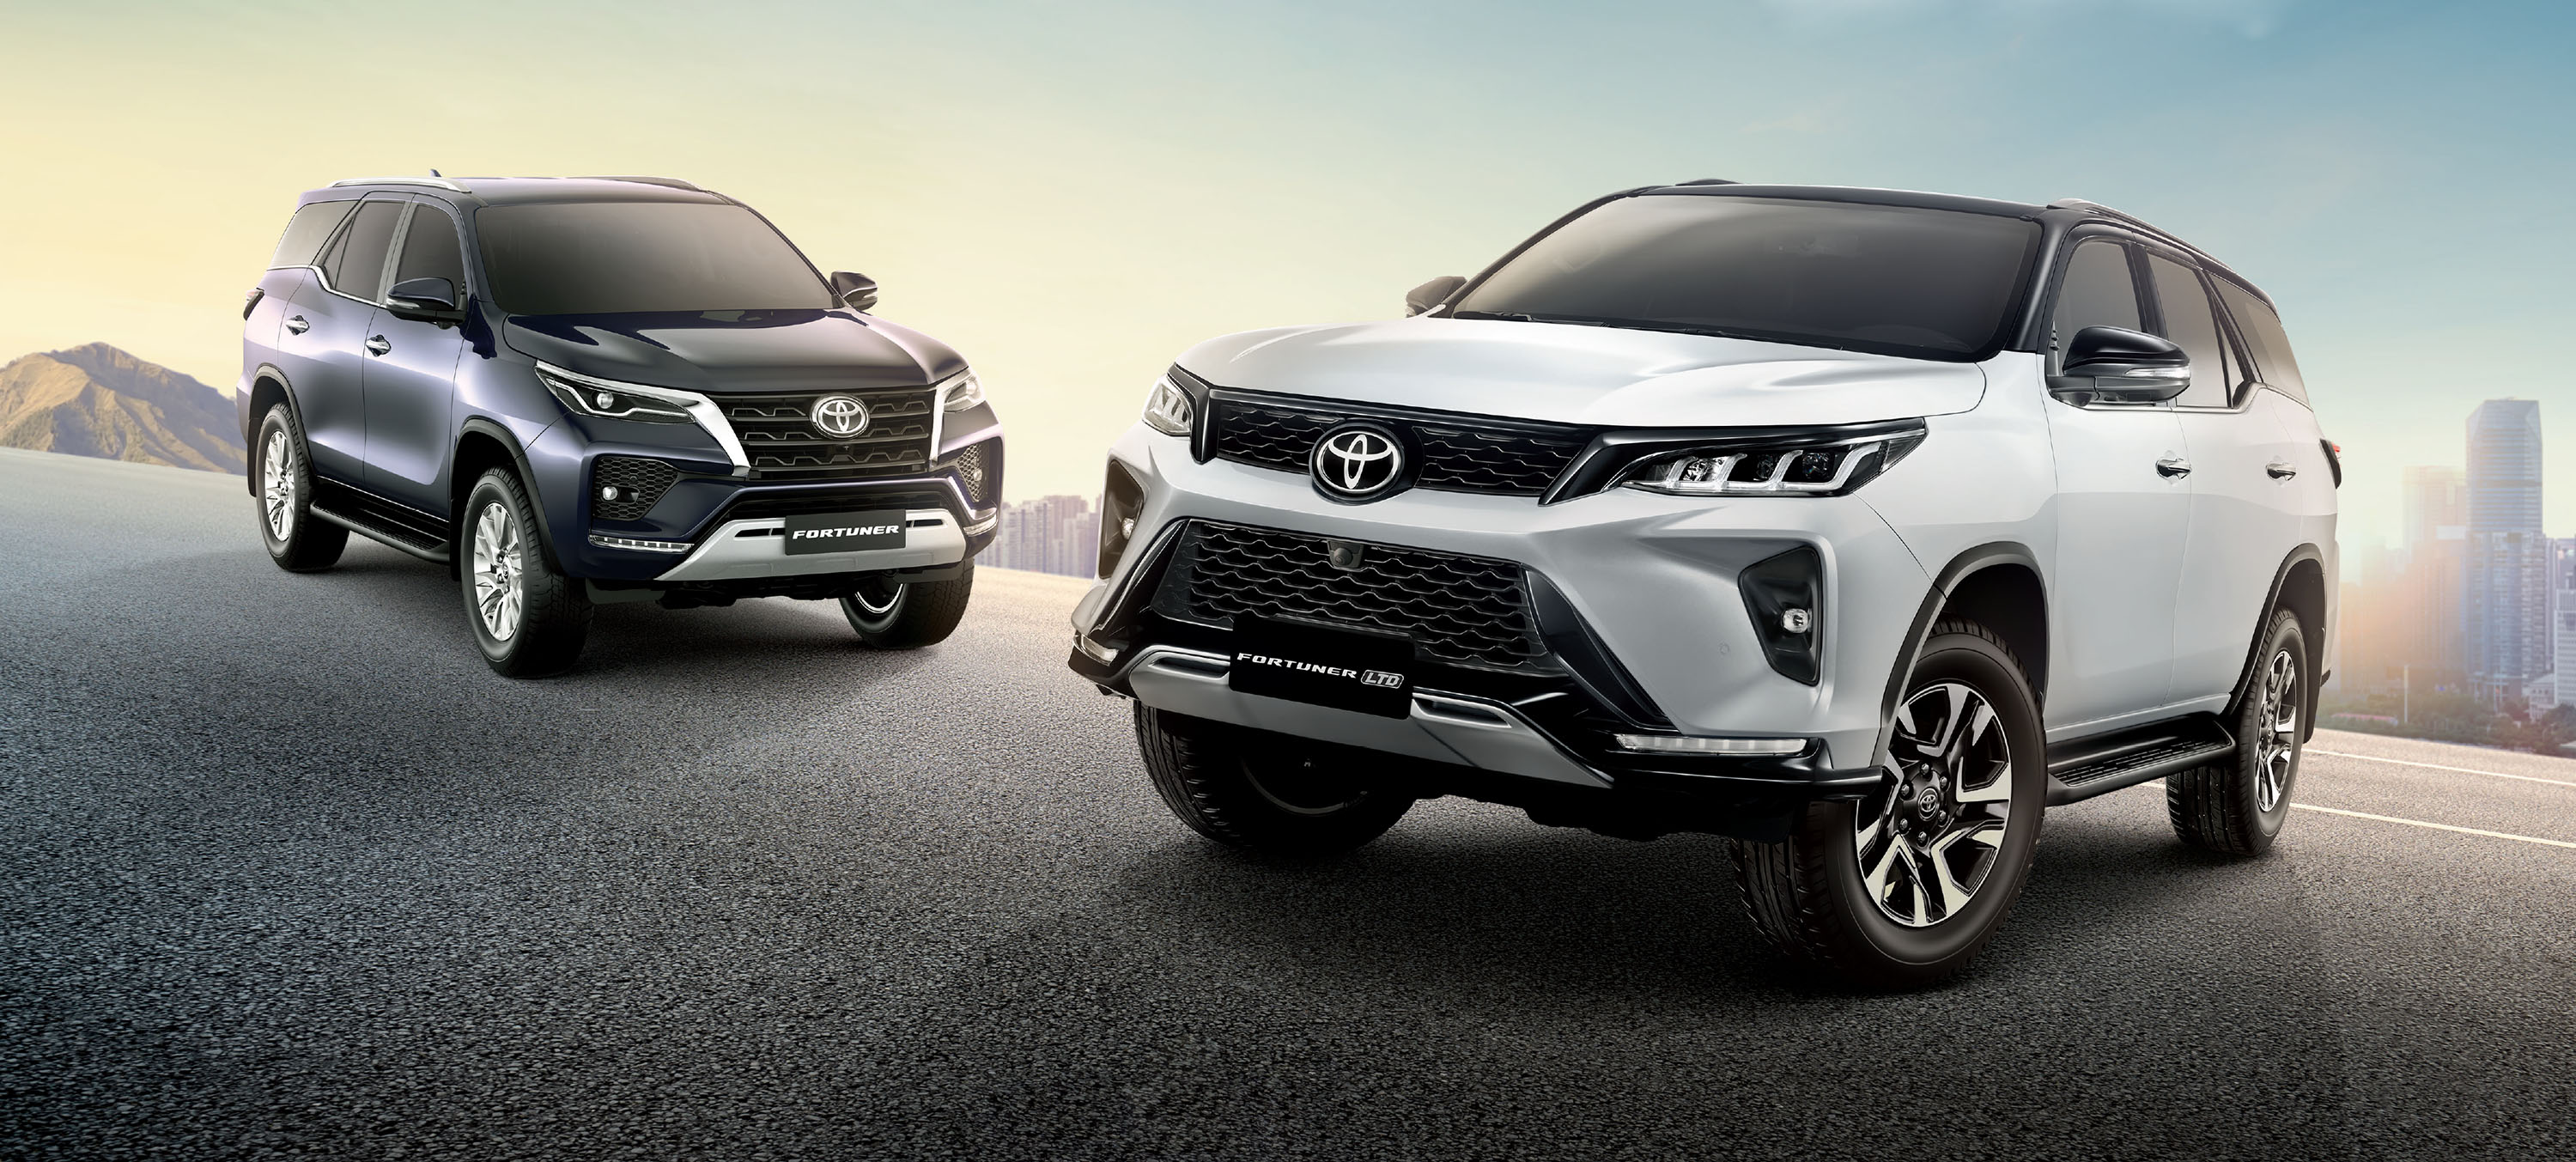 2021 Toyota Fortuner Now On Sale In PH, Starts At P1.633M